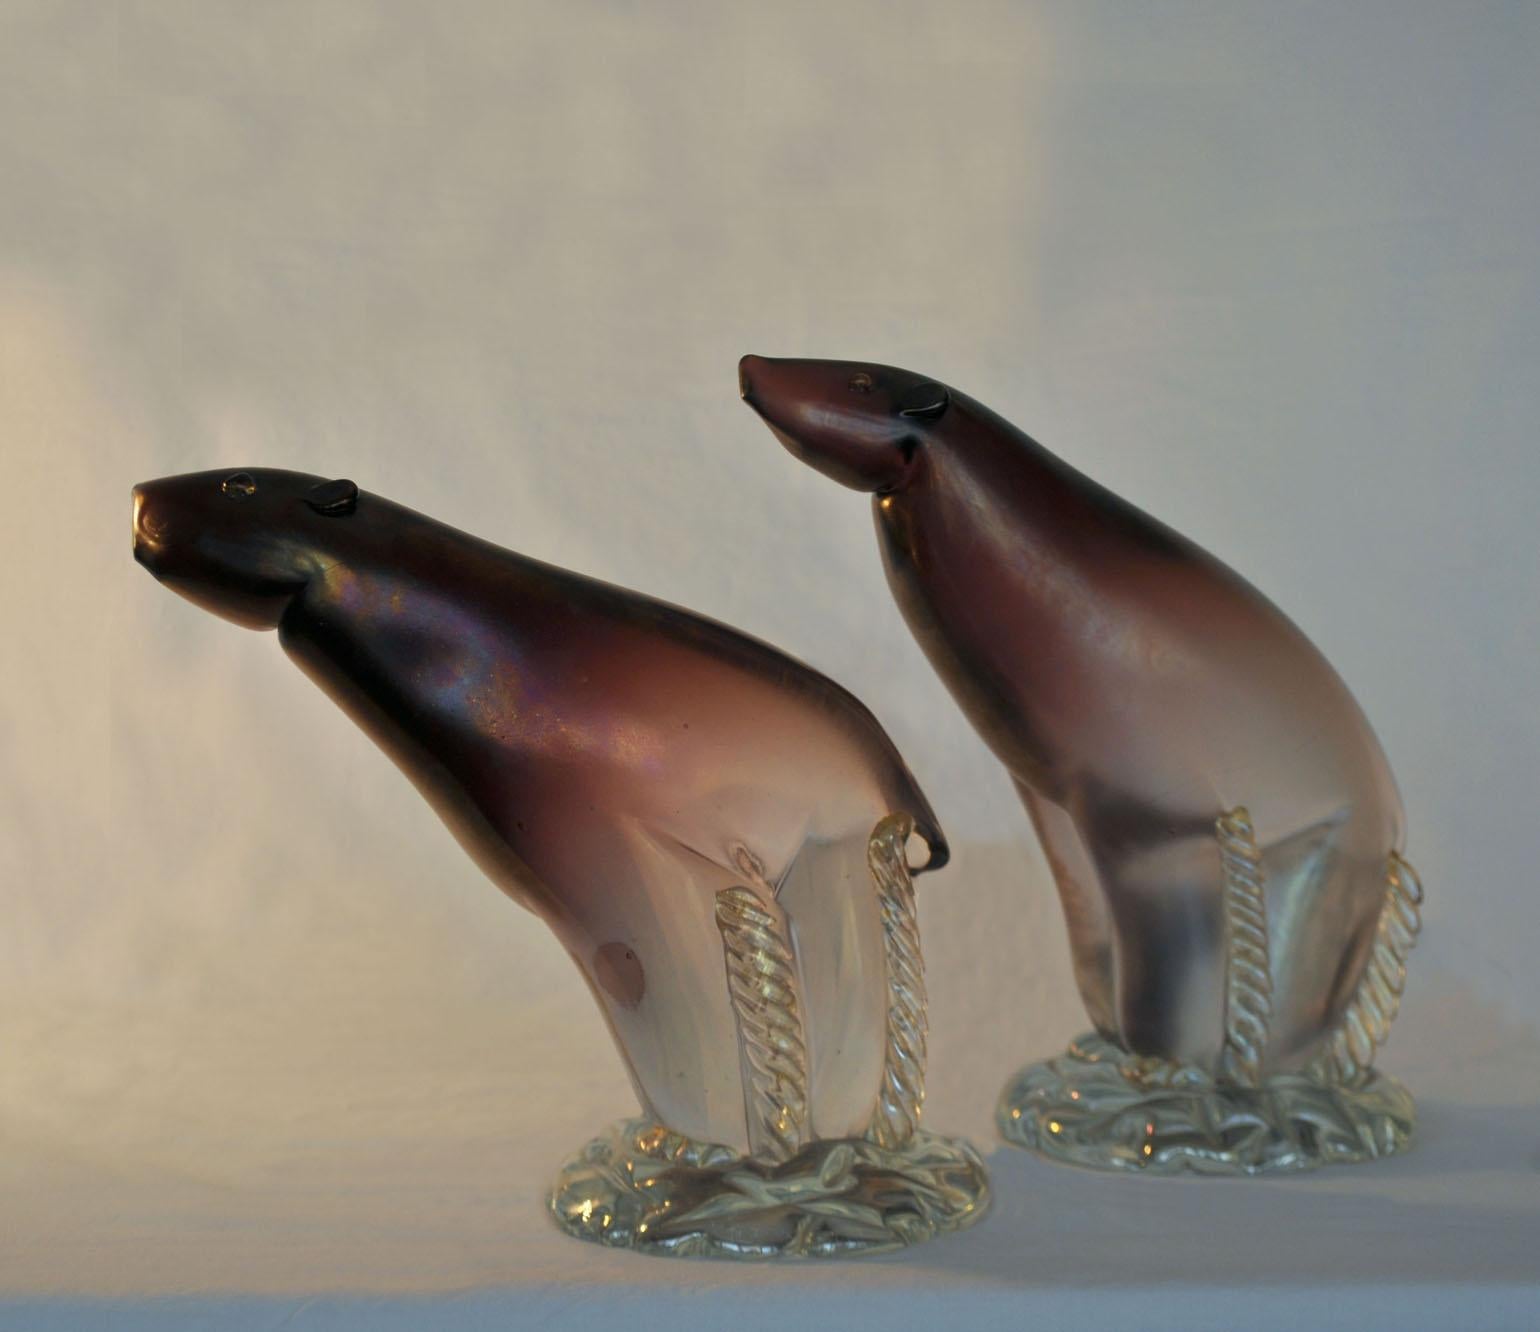 Hand blown Muralo polar bear sculptures by Alfredo Barbini, late 1940s-early 1950s
Color runs from aubergine bleeding in to opalescent clear iridized glass.
Alfredo Barbini, glass artist born in 1912, was one of Murano’s leading figures of the